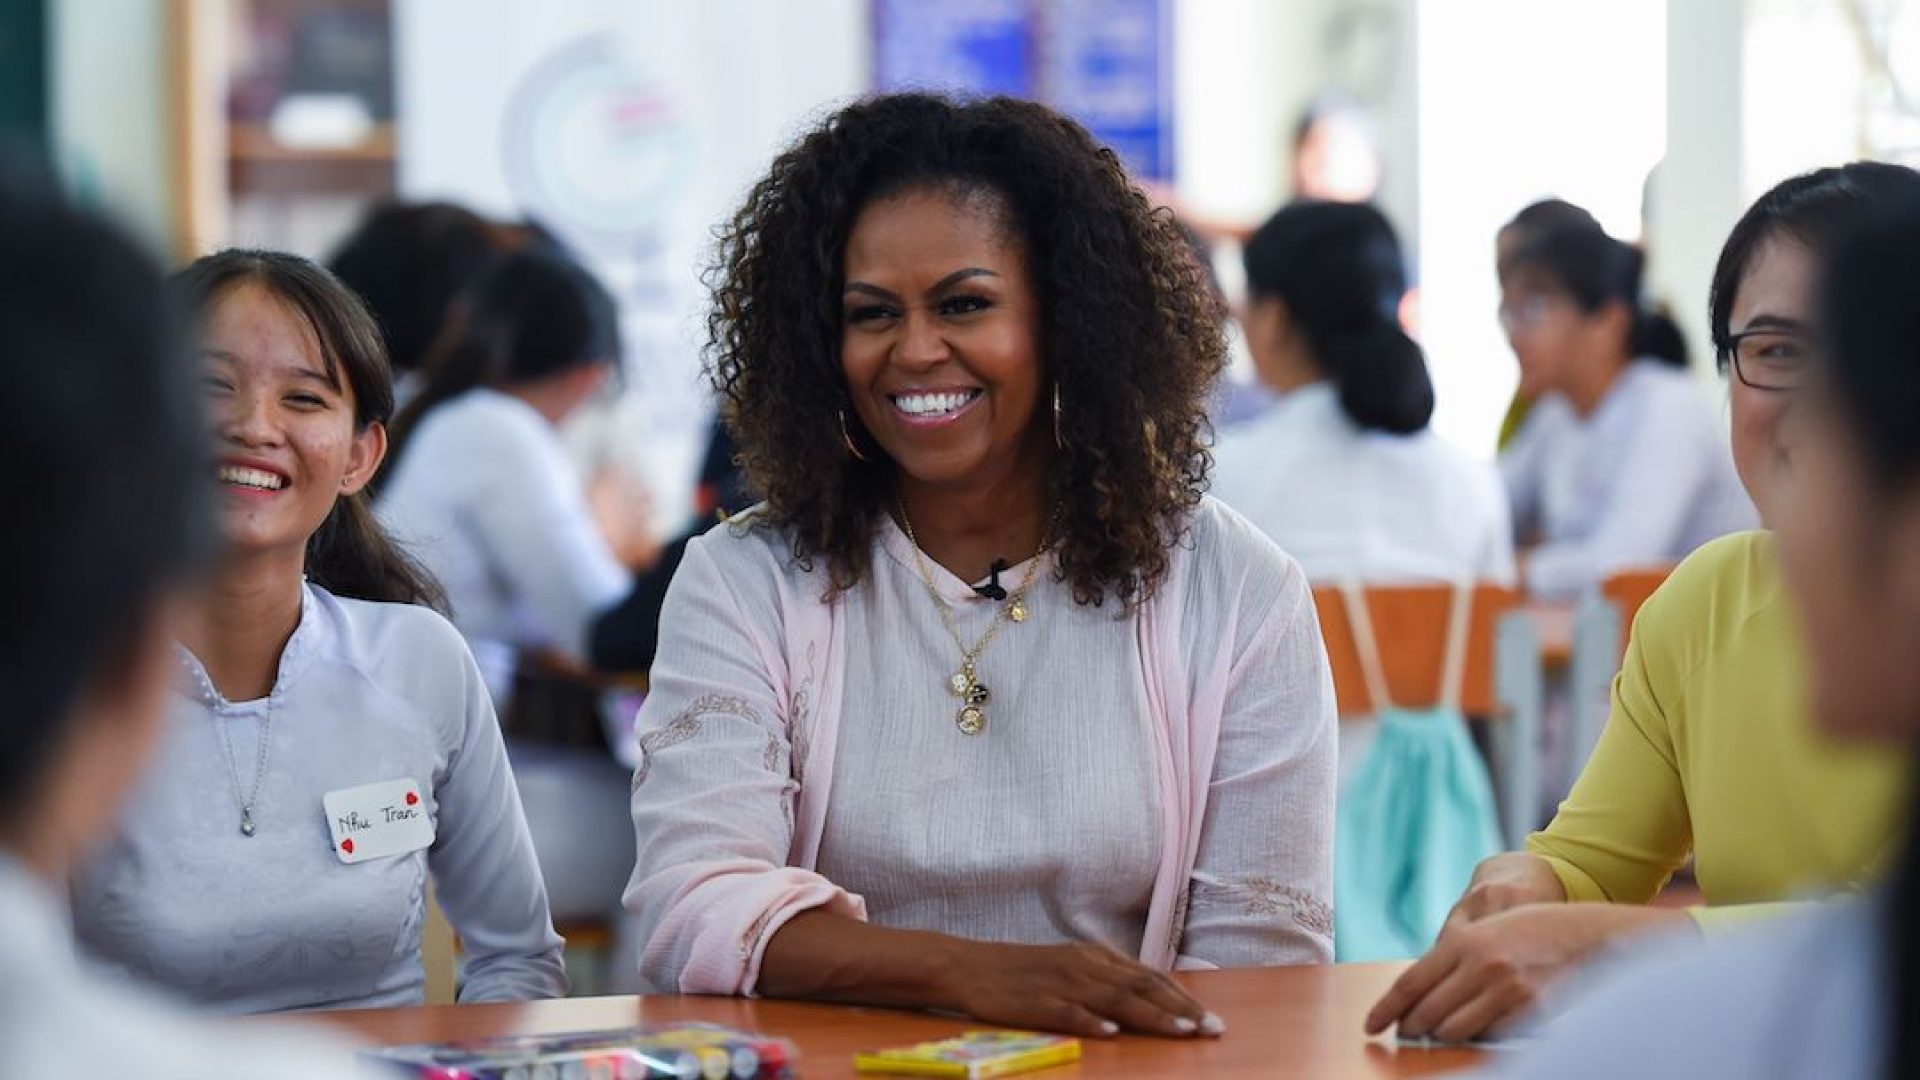 YouTube Announces Original Special 'Creators For Change With Michelle Obama'